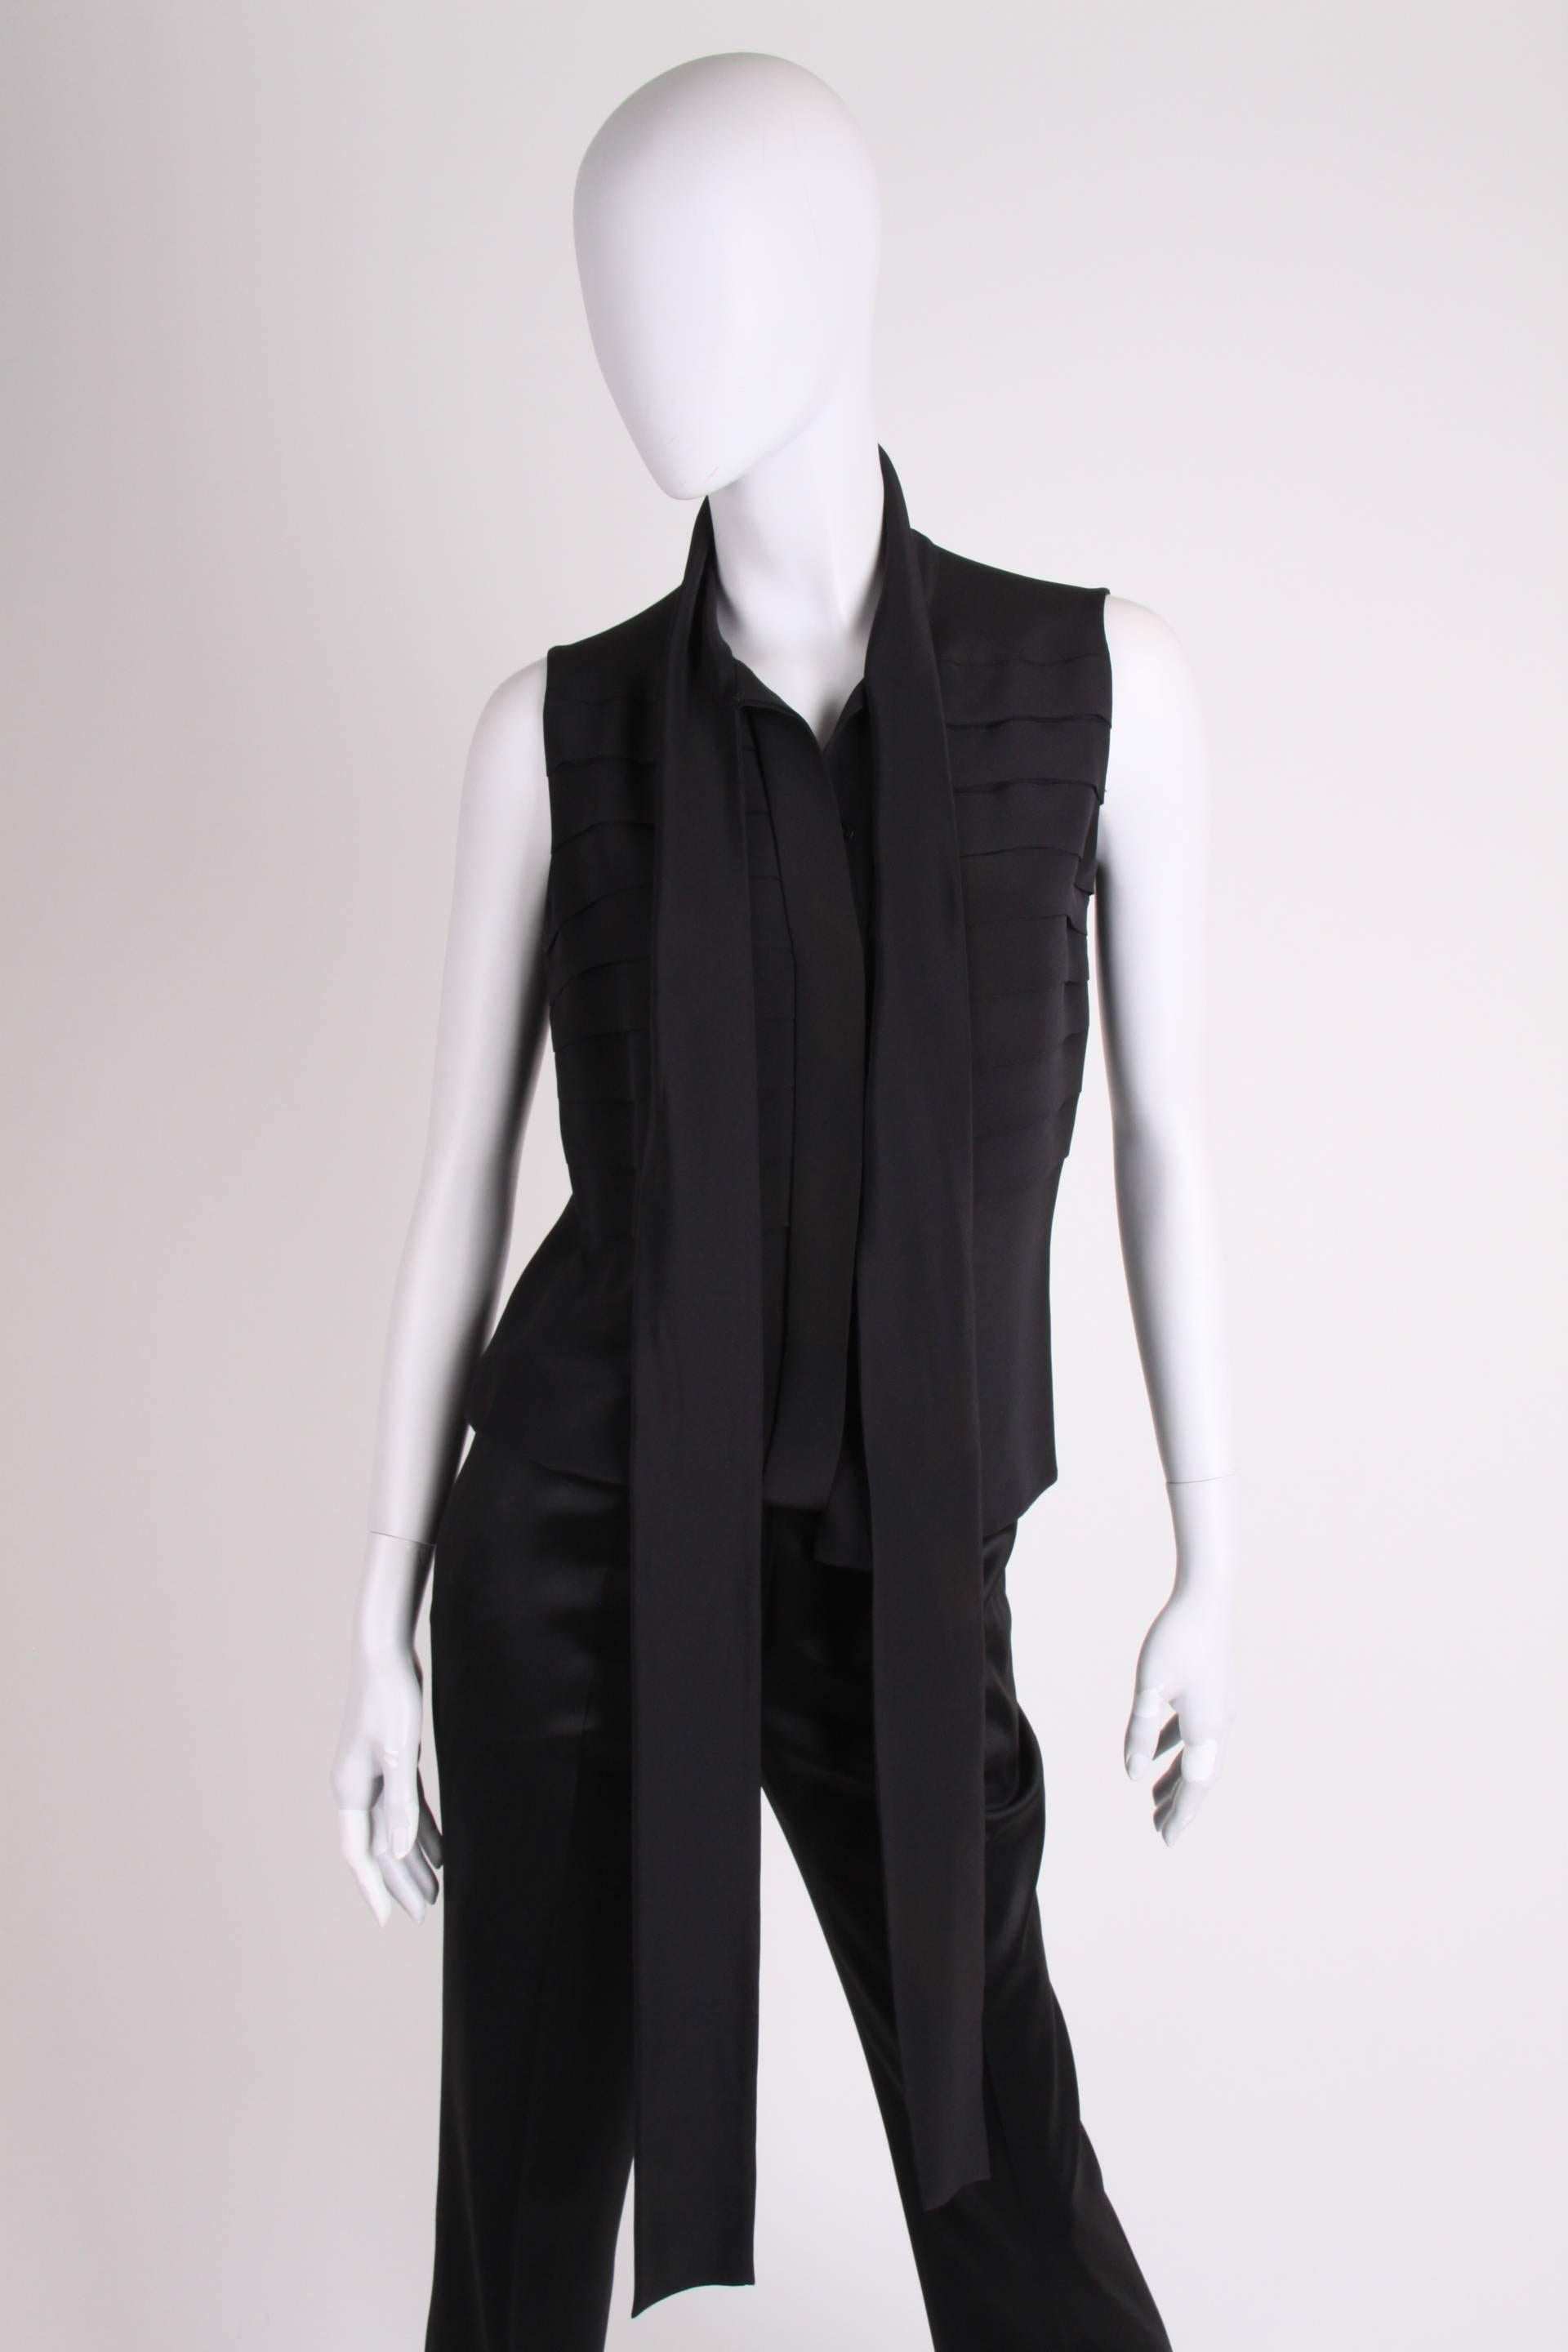 Elegant sleeveless blouse by Chanel in black silk, an oldtime classic!

This blouse has hip length and button closure up front. Eight stitched horizontal pleats in the upper part on the front and back. The collar is a rather long and wide ribbon of